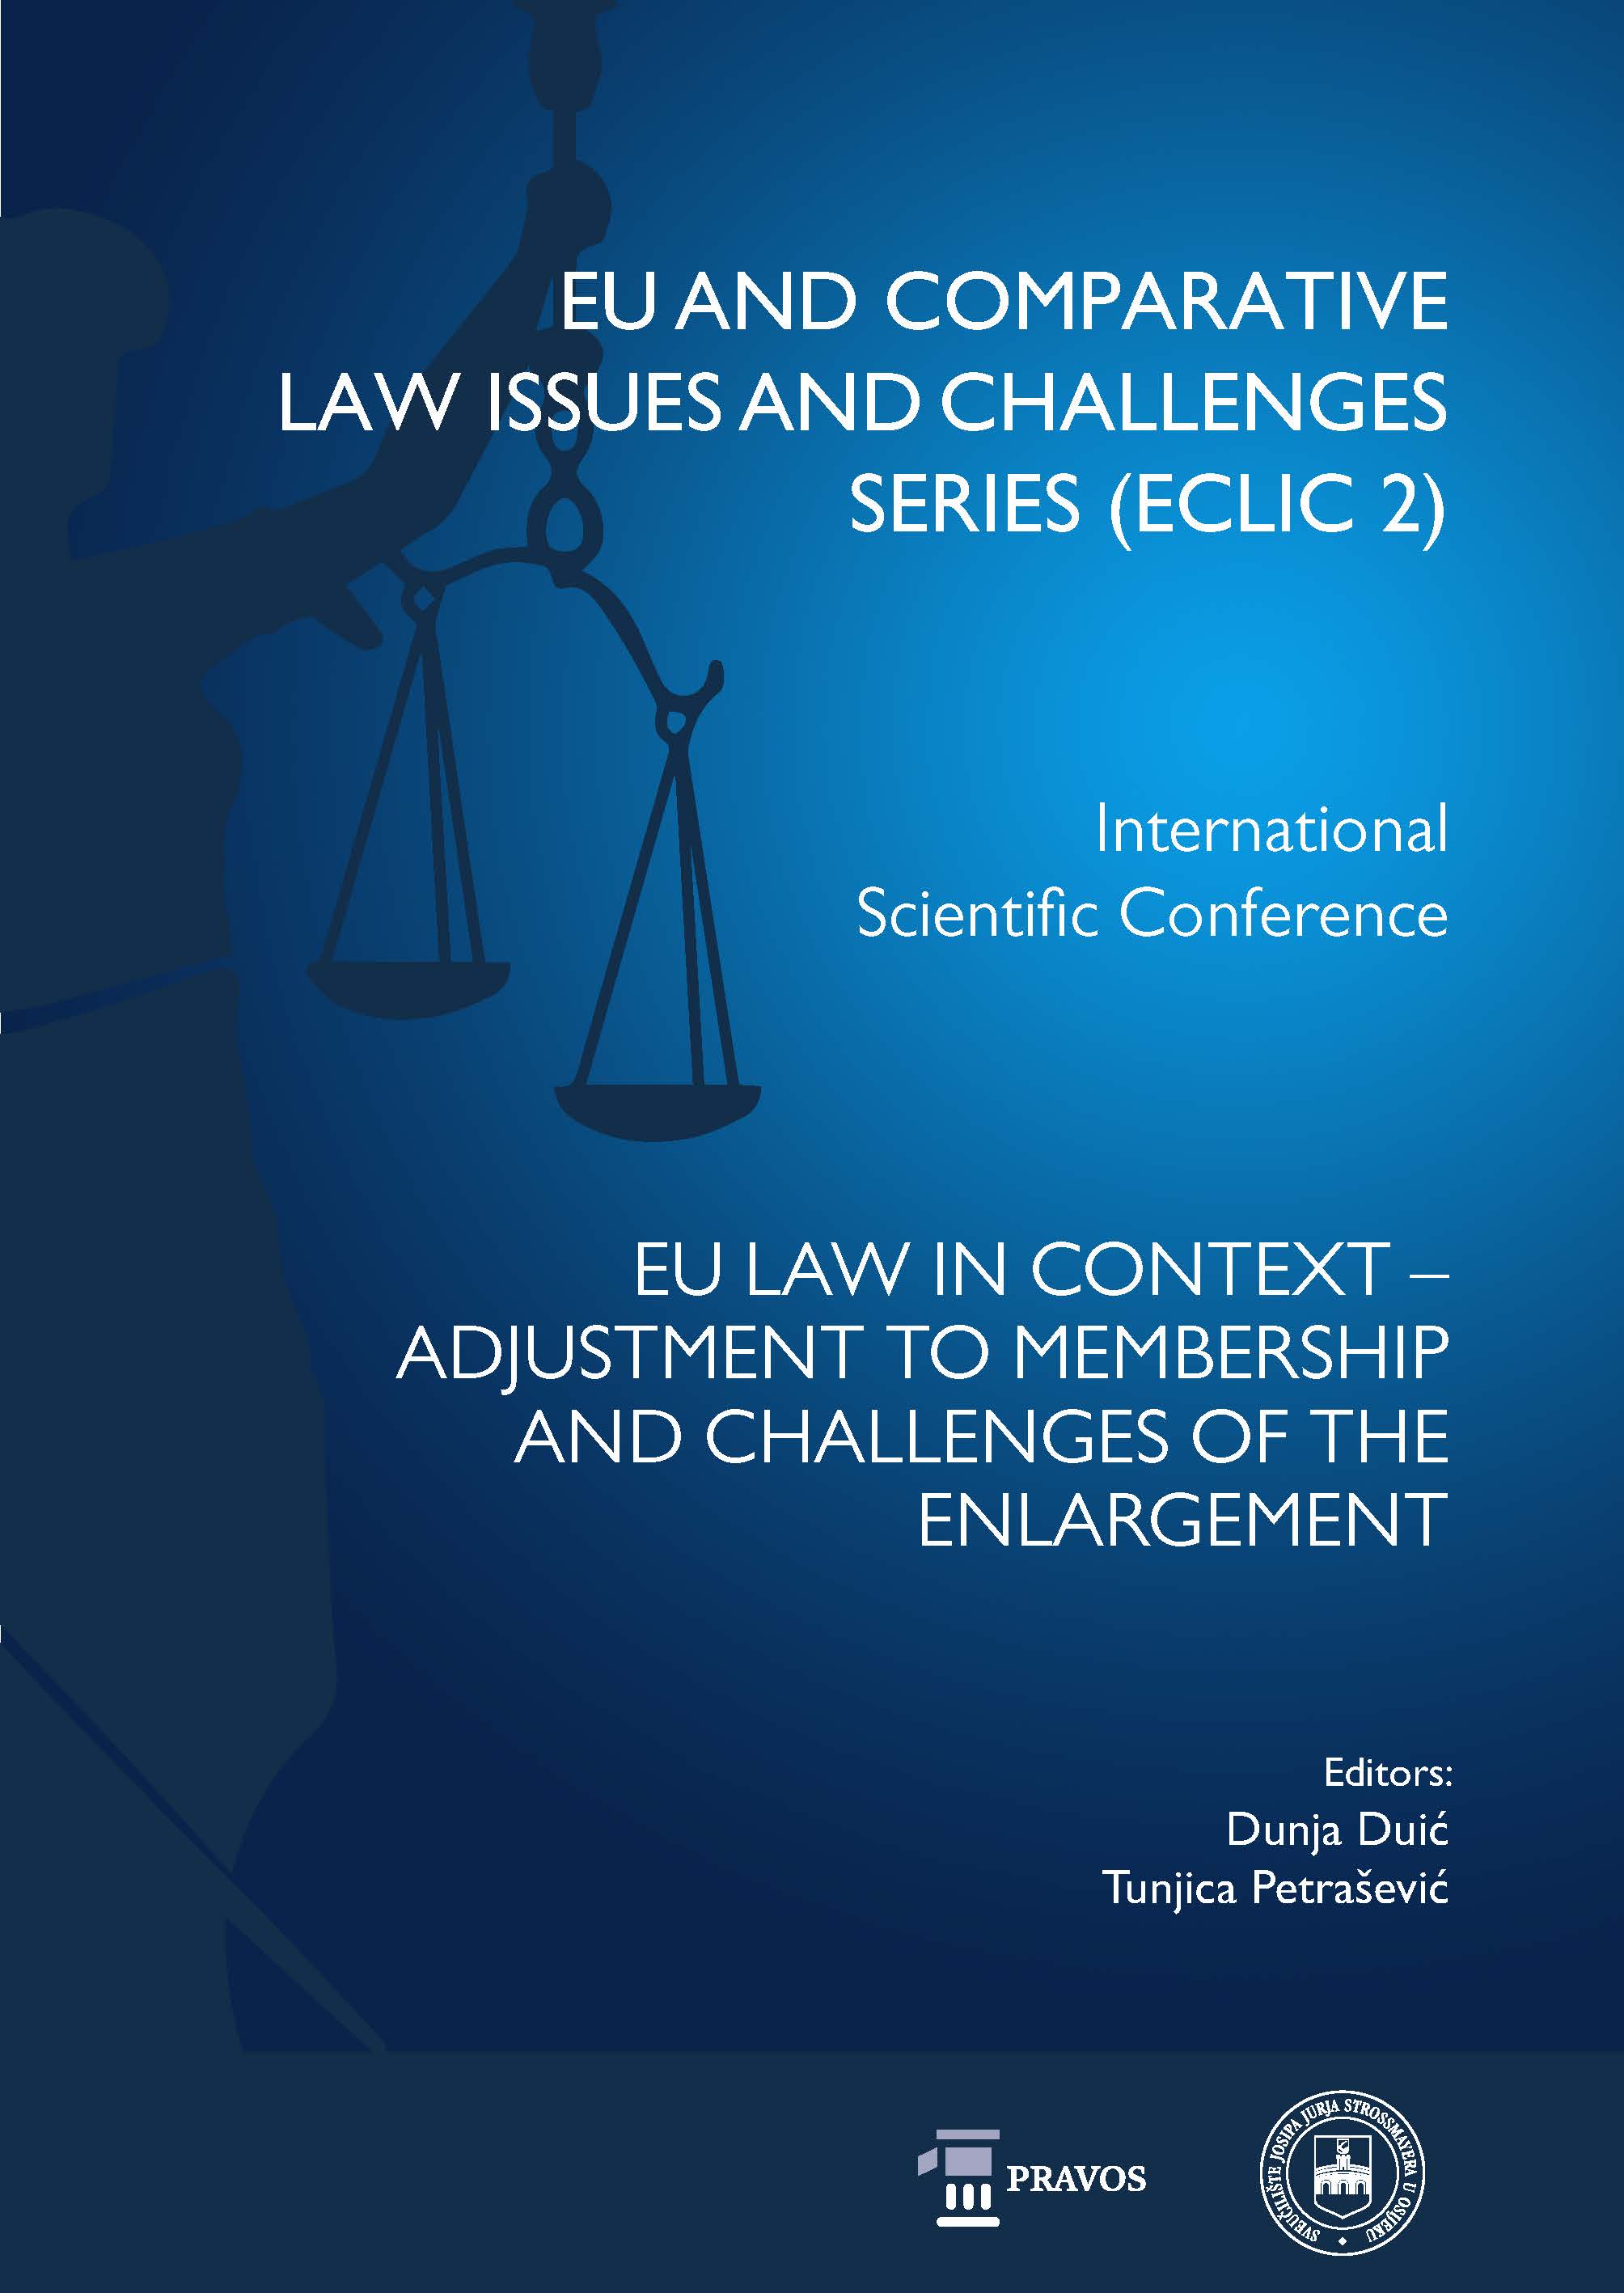 					View Vol. 2 (2018): EU LAW IN CONTEXT – ADJUSTMENT TO MEMBERSHIP AND CHALLENGES OF THE ENLARGEMENT
				